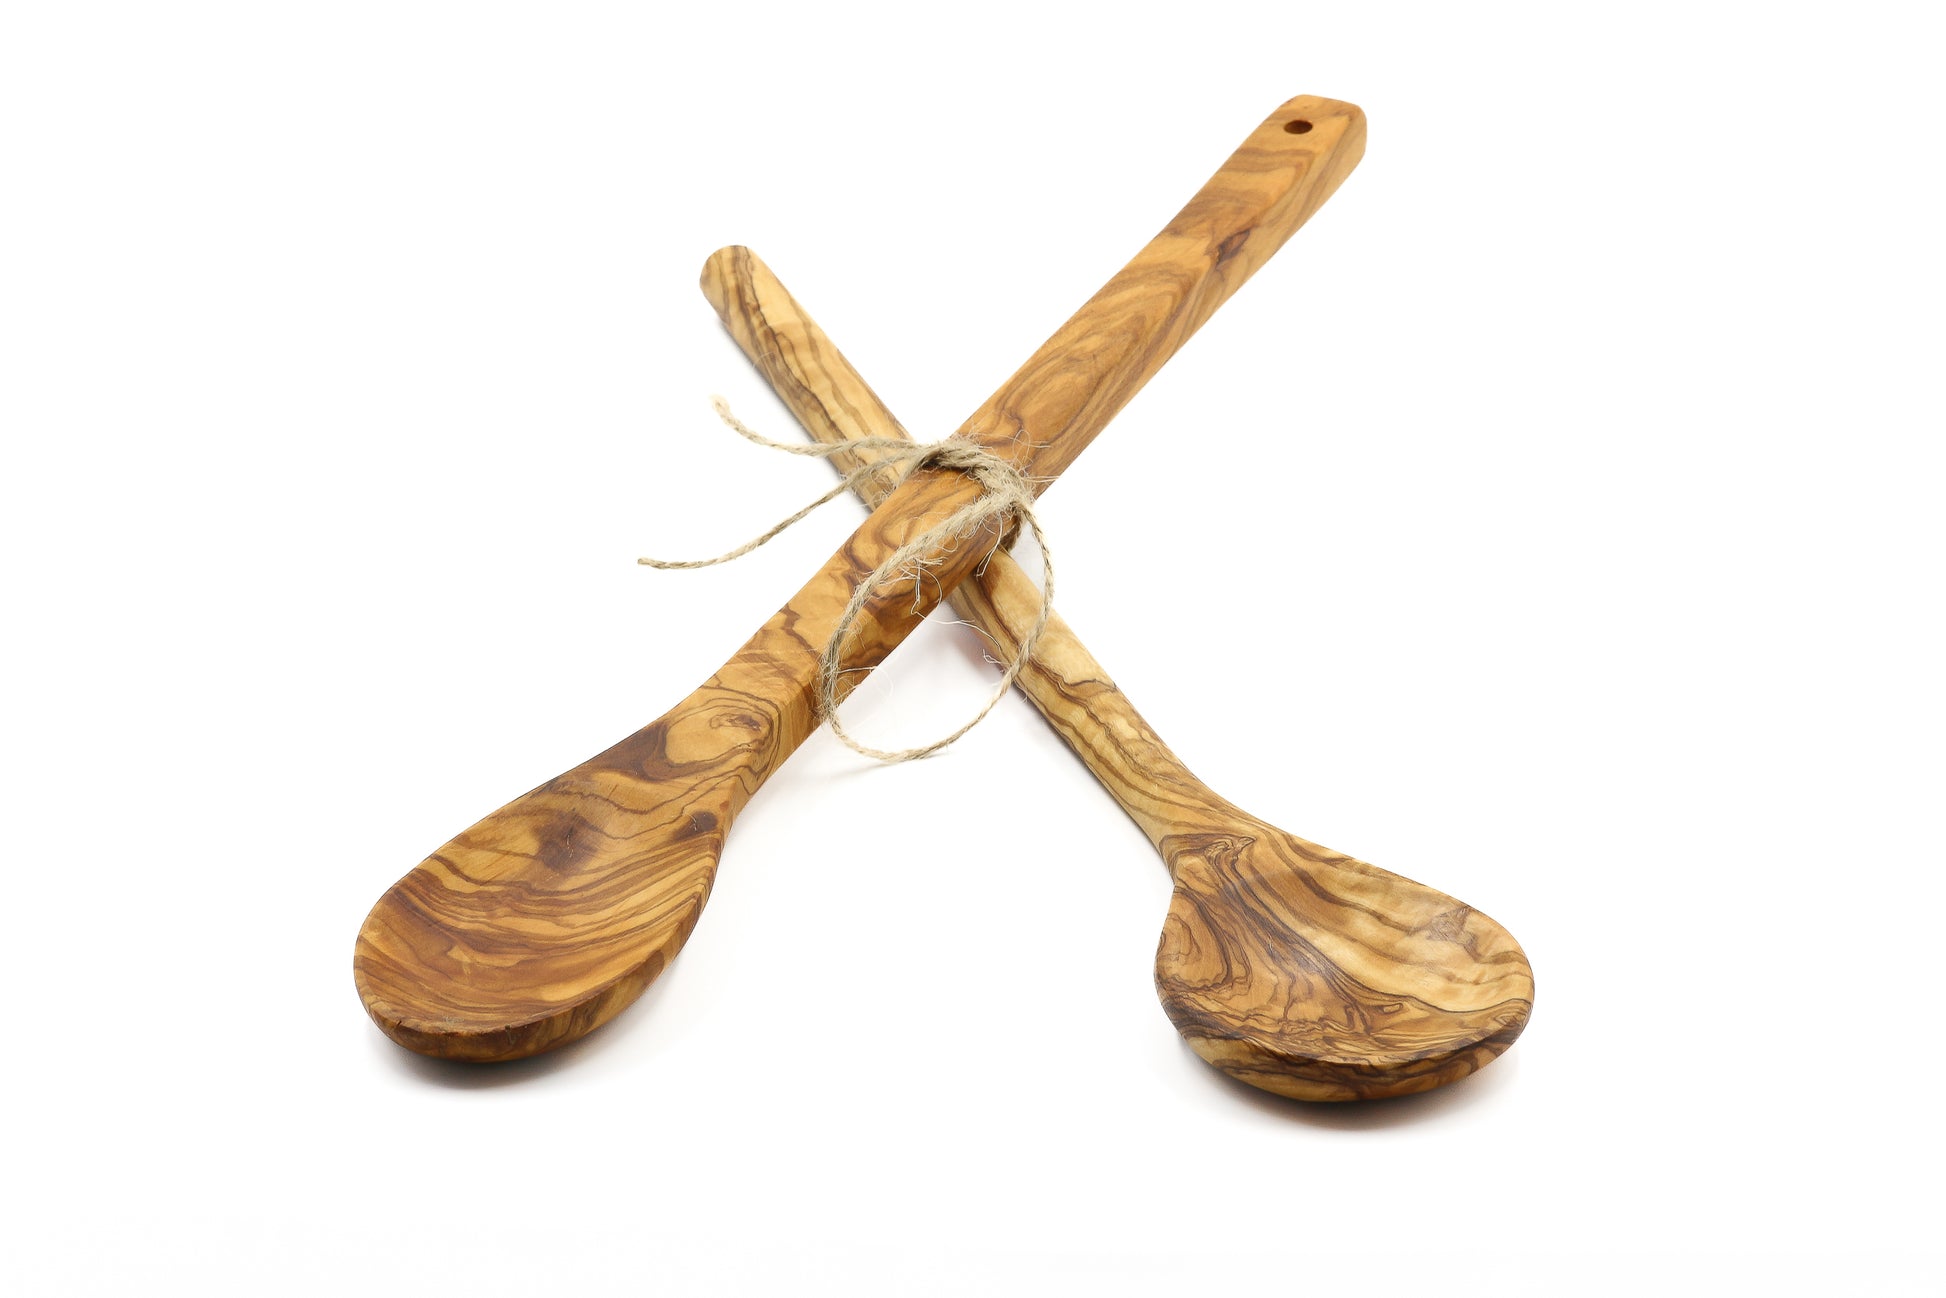 Handcrafted olive wood spoon for stirring, mixing, and cooking